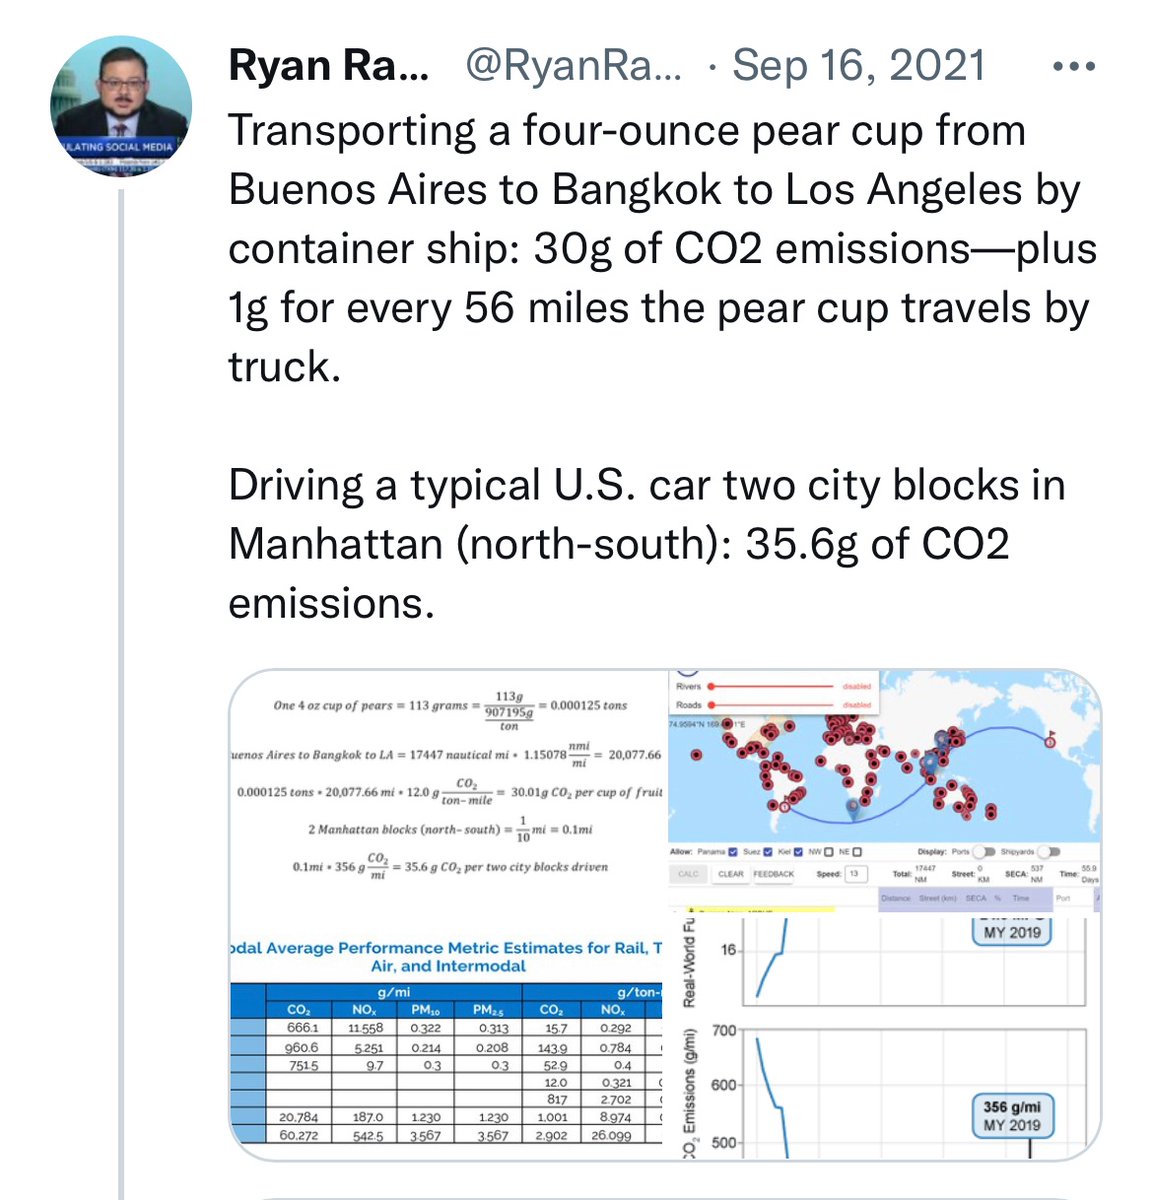 this post goes viral every couple months but what most people don’t realize is that driving to the supermarket creates far more emissions than shipping the pears maritime container shipping is really efficient! personal automobiles are not